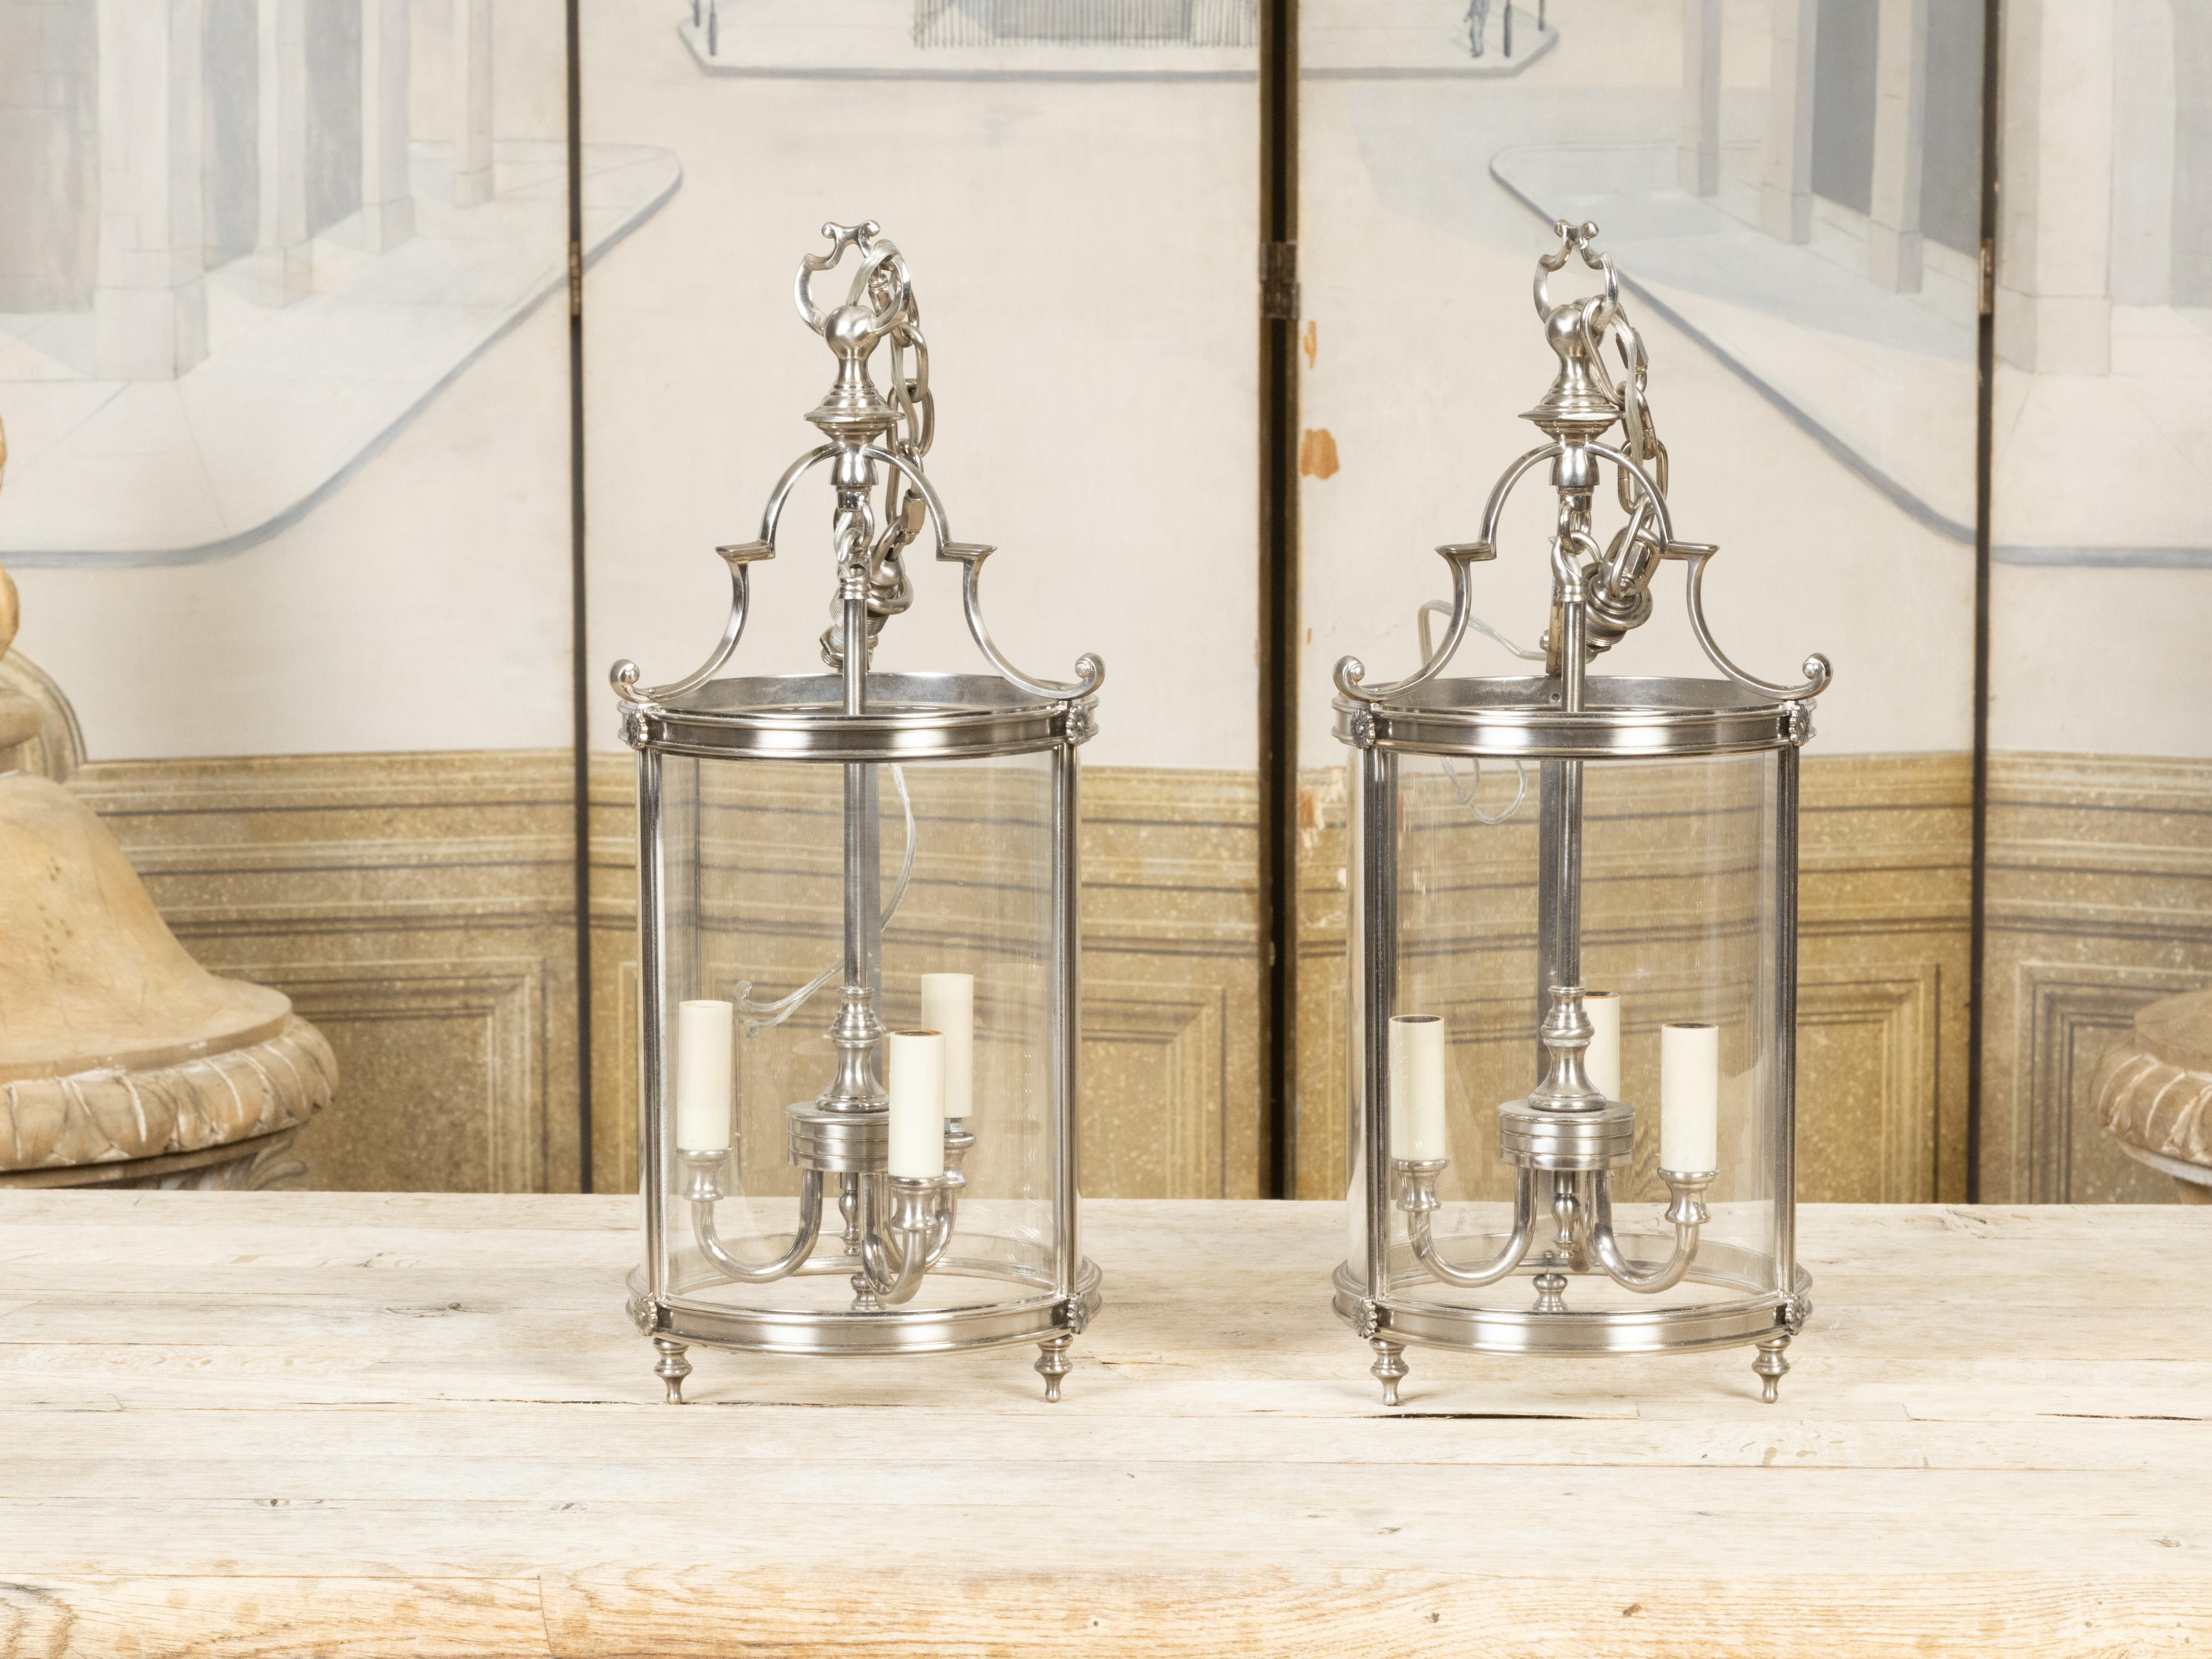 A pair of vintage English metal lanterns from the mid 20th century, with nickel finish, three lights and glass body. Created in England during the third quarter of the 20th century, this pair of hall lanterns attracts our attention with their lovely